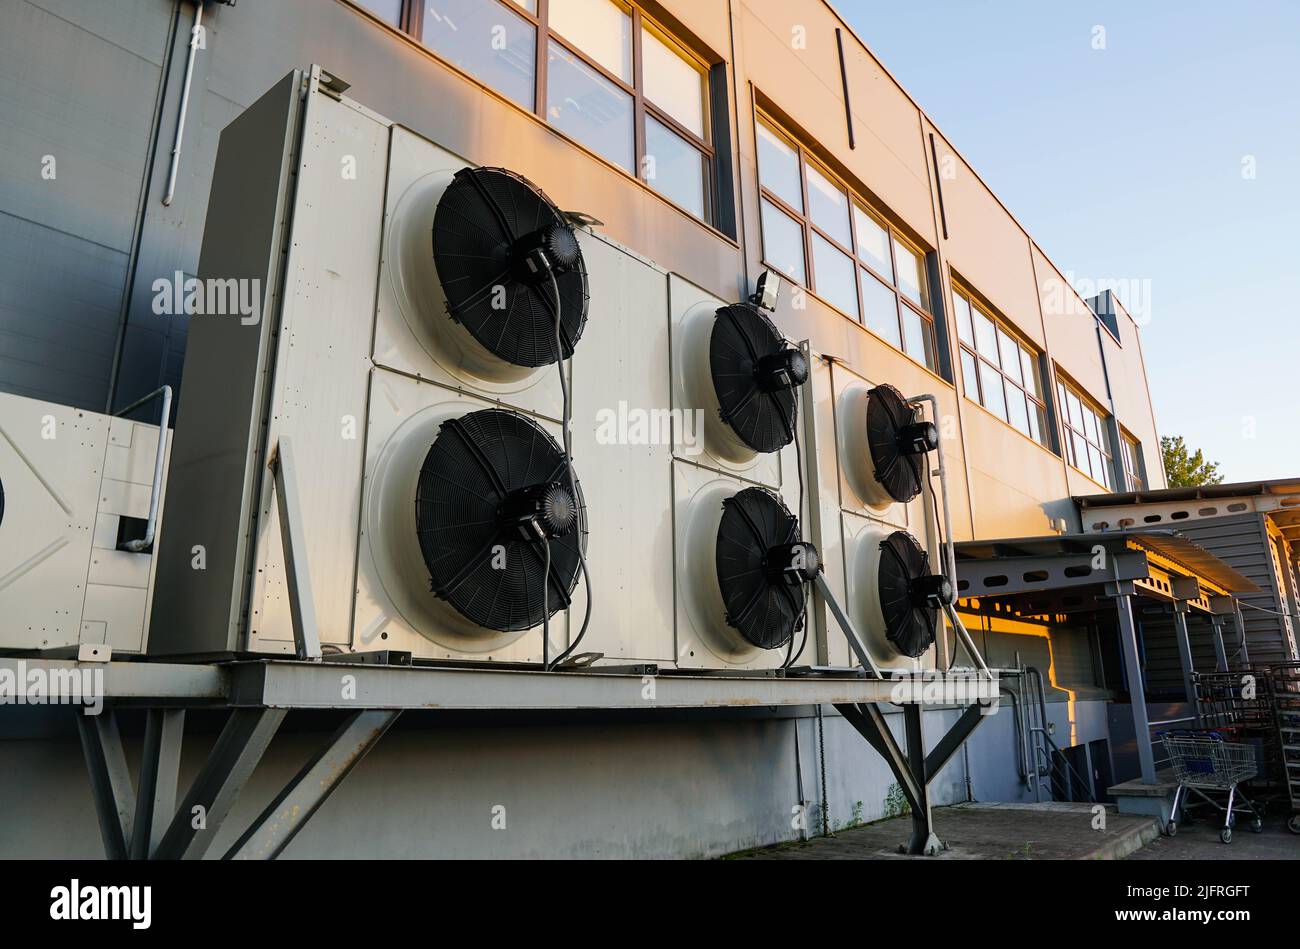 Industrial refrigeration unit, air conditioning equipment with fans Stock Photo